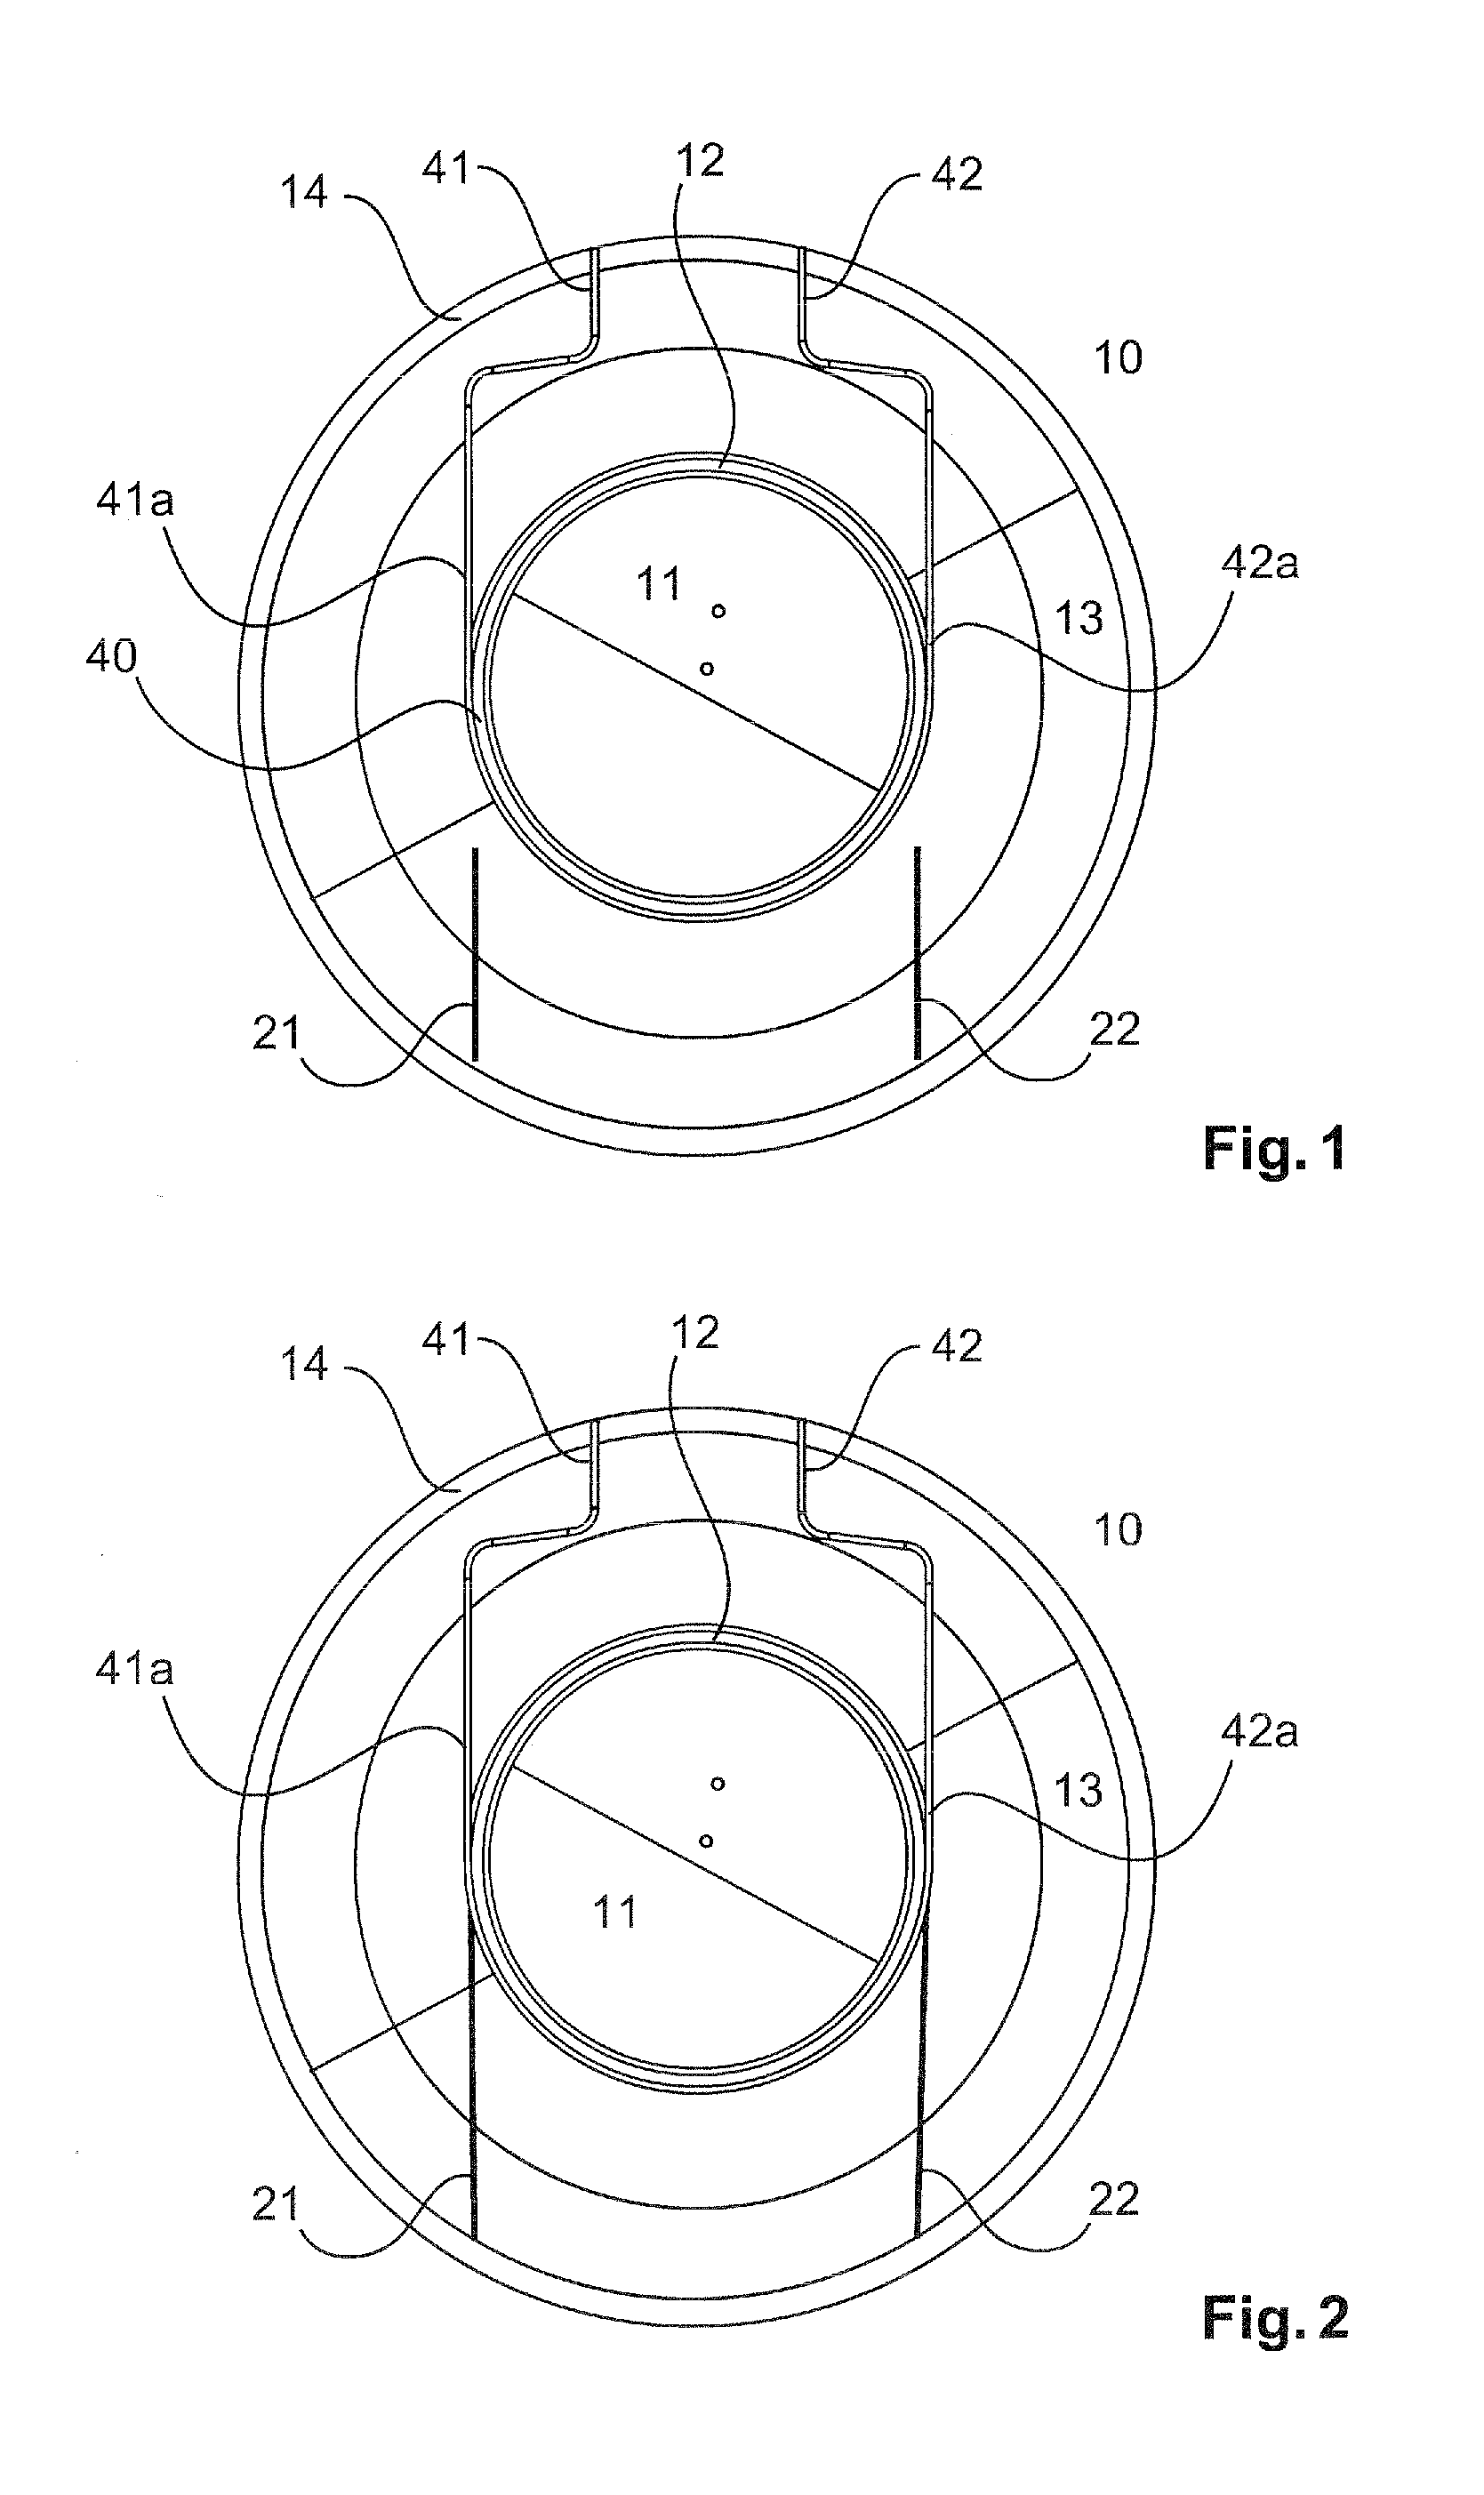 Dynamic electroacoustic transducer